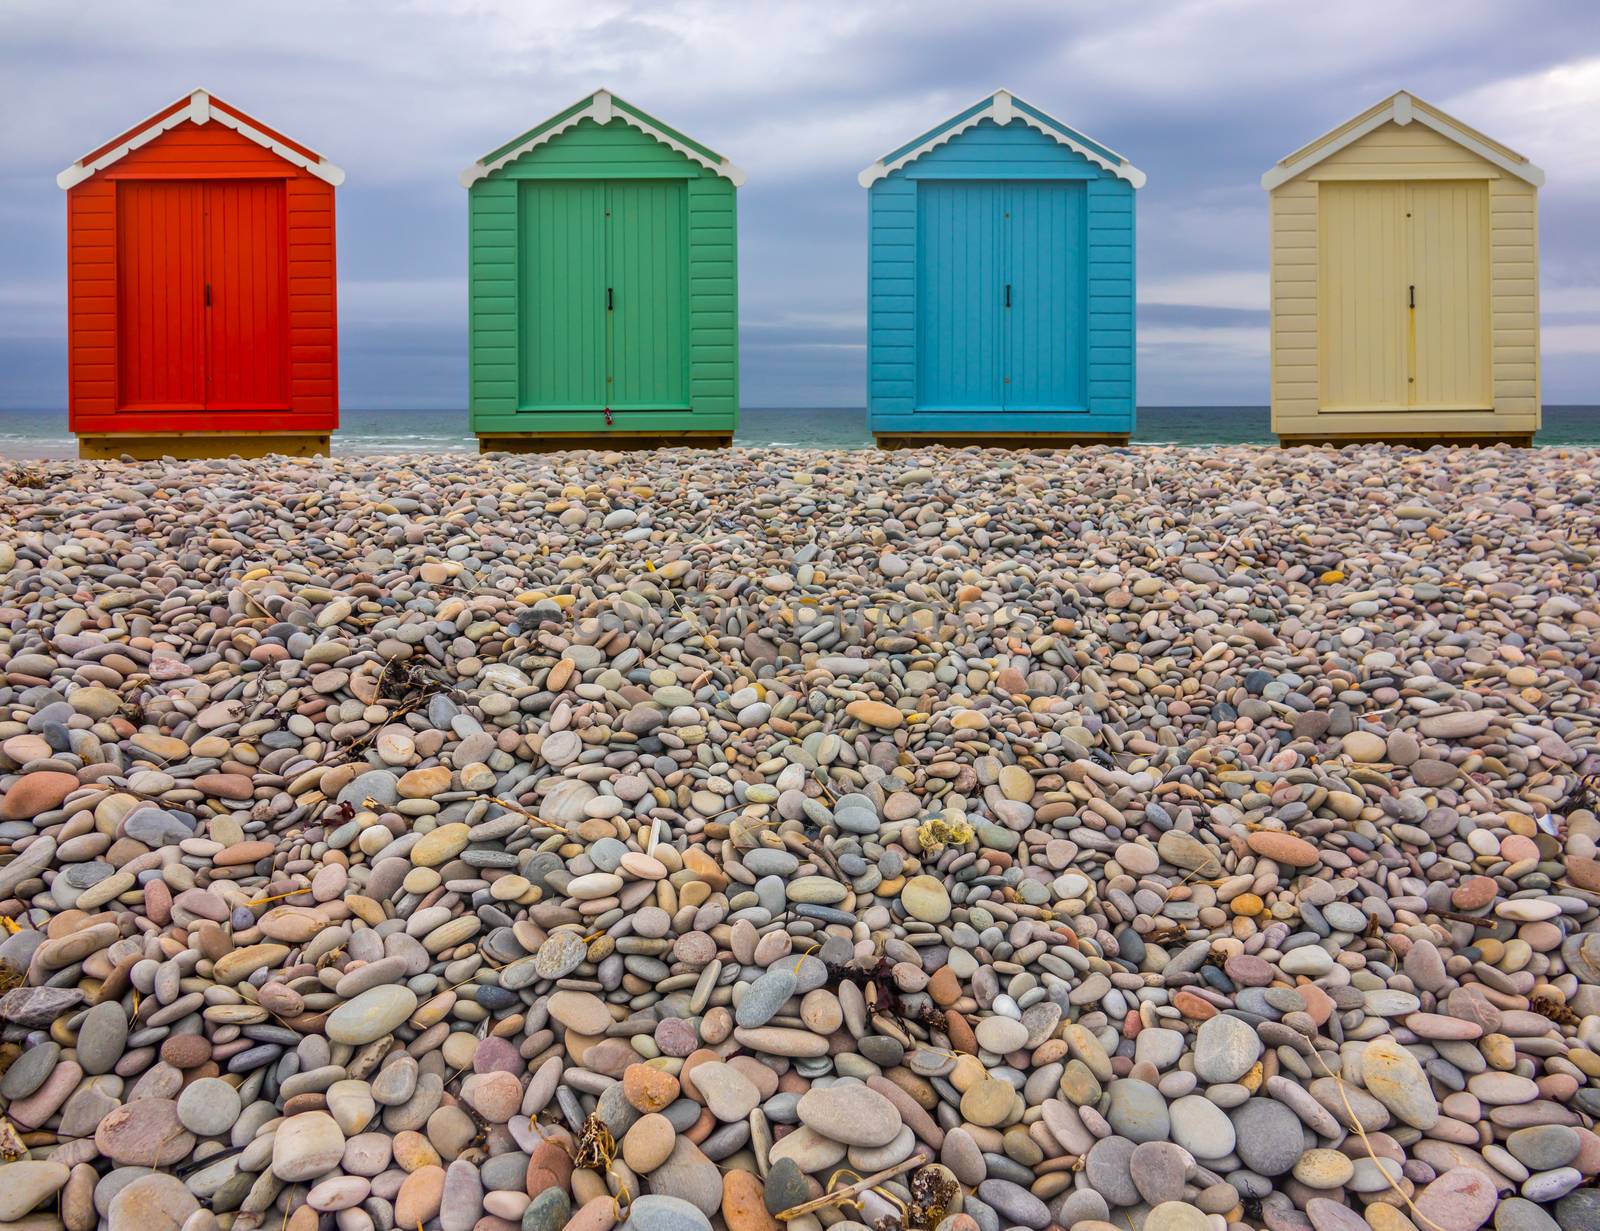 Vintage British Beach Huts On A Stony Shore With Wintry Sky With Copy Space (Focus On Foreground)